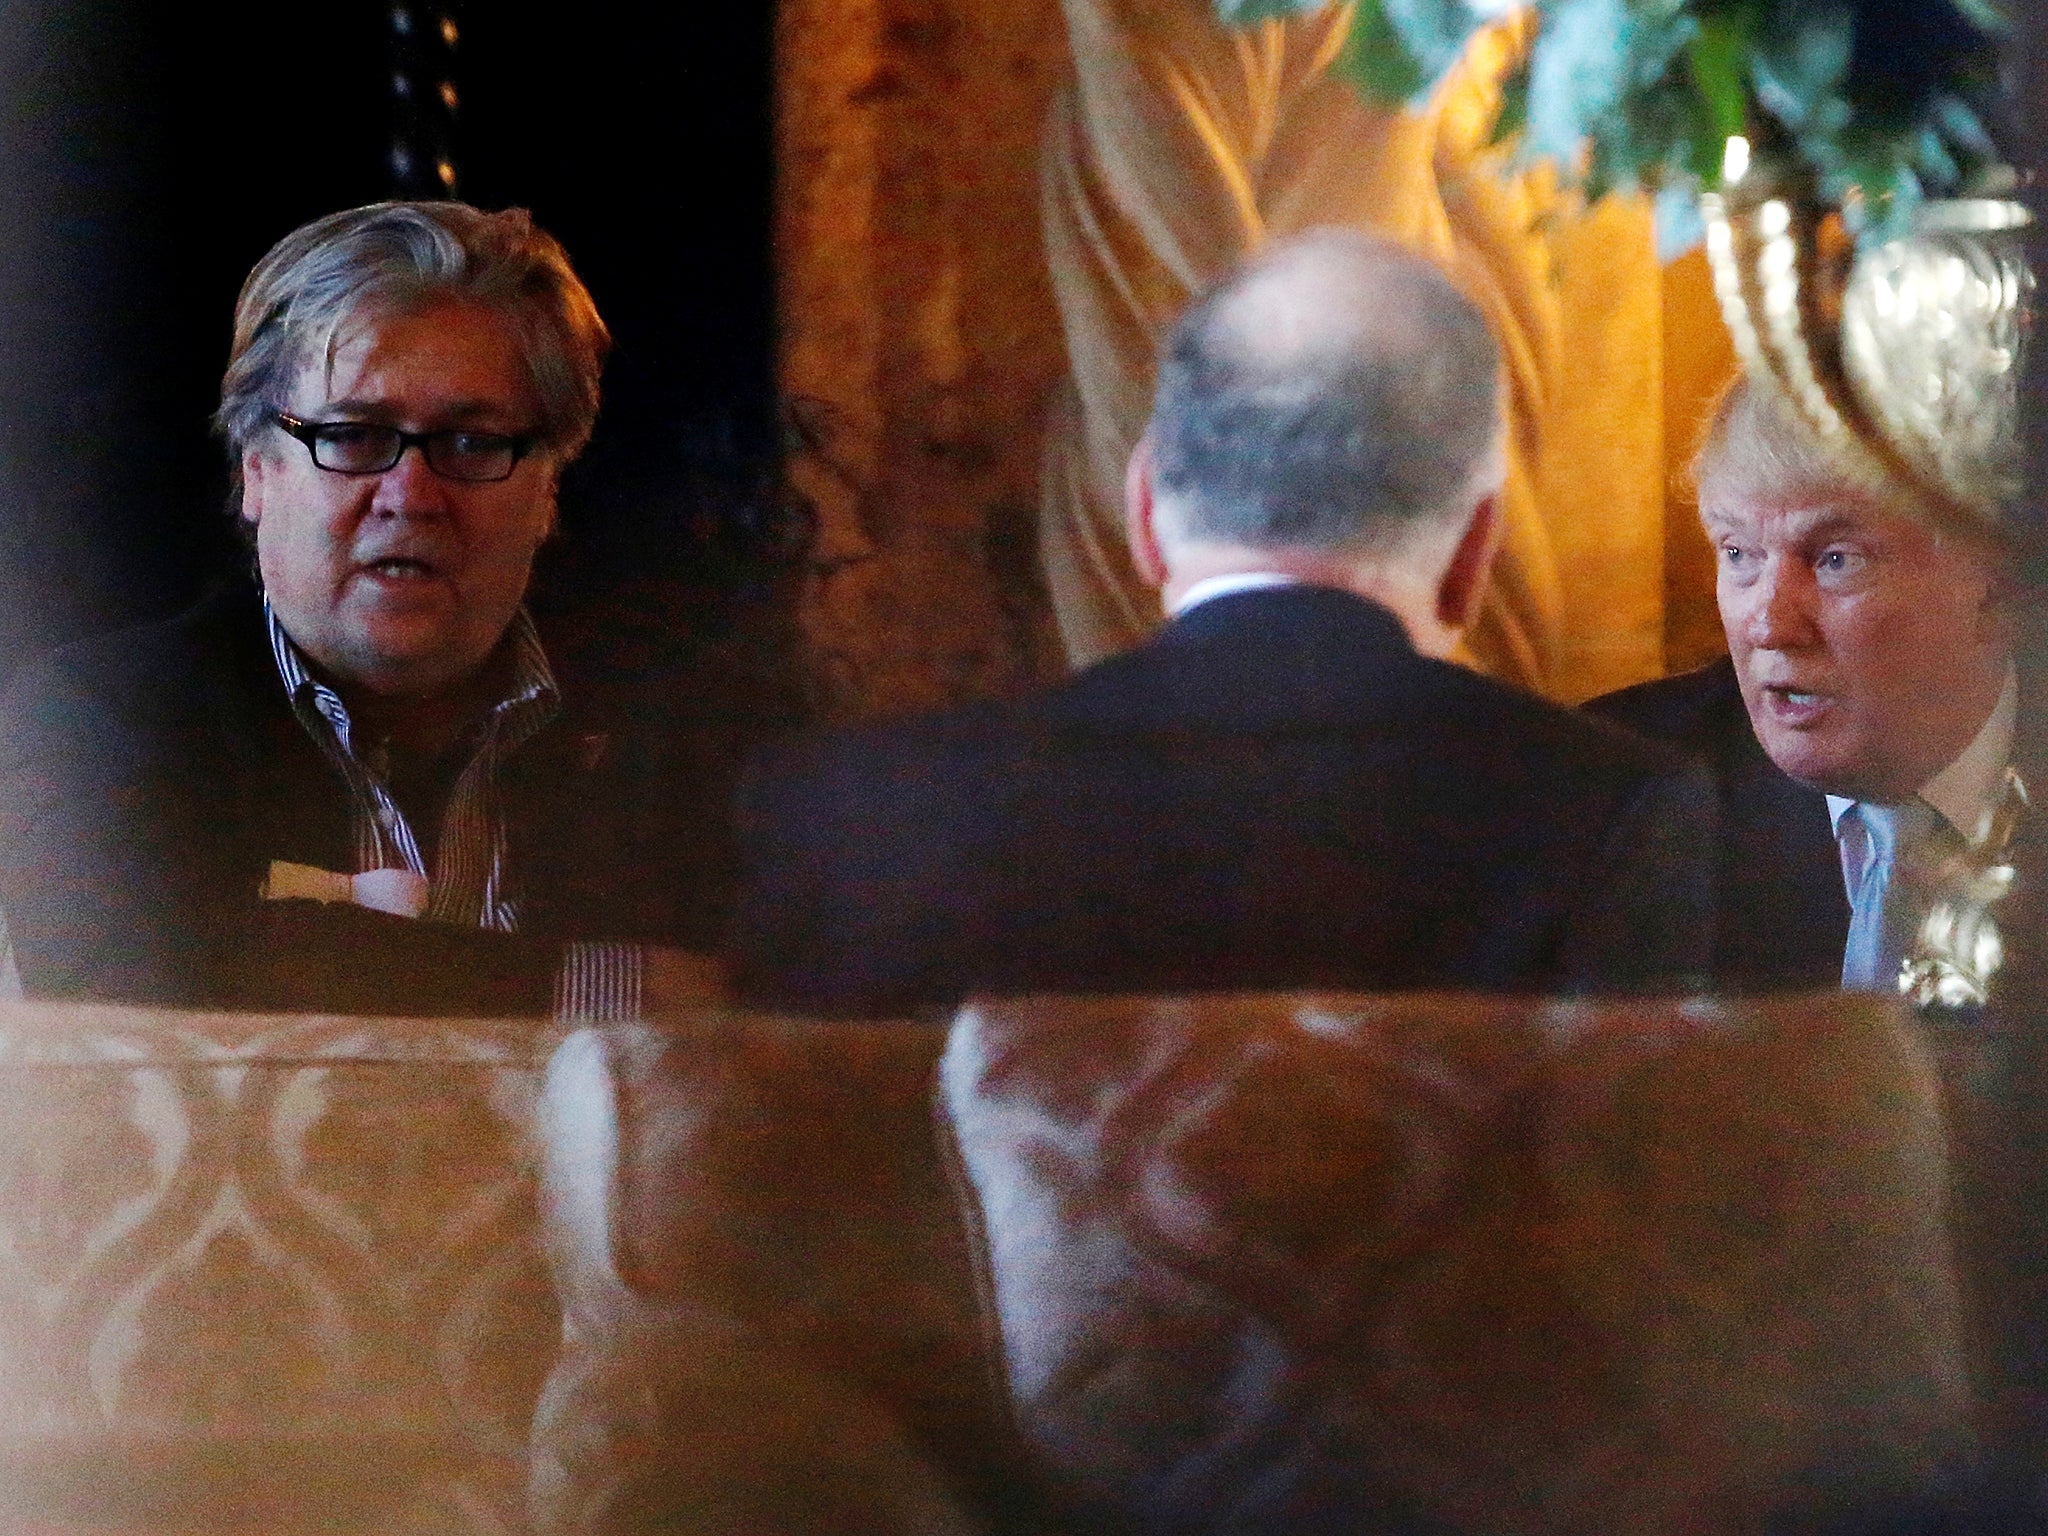 Steve Bannon is Trump’s senior advisor with a seat on the National Security Council